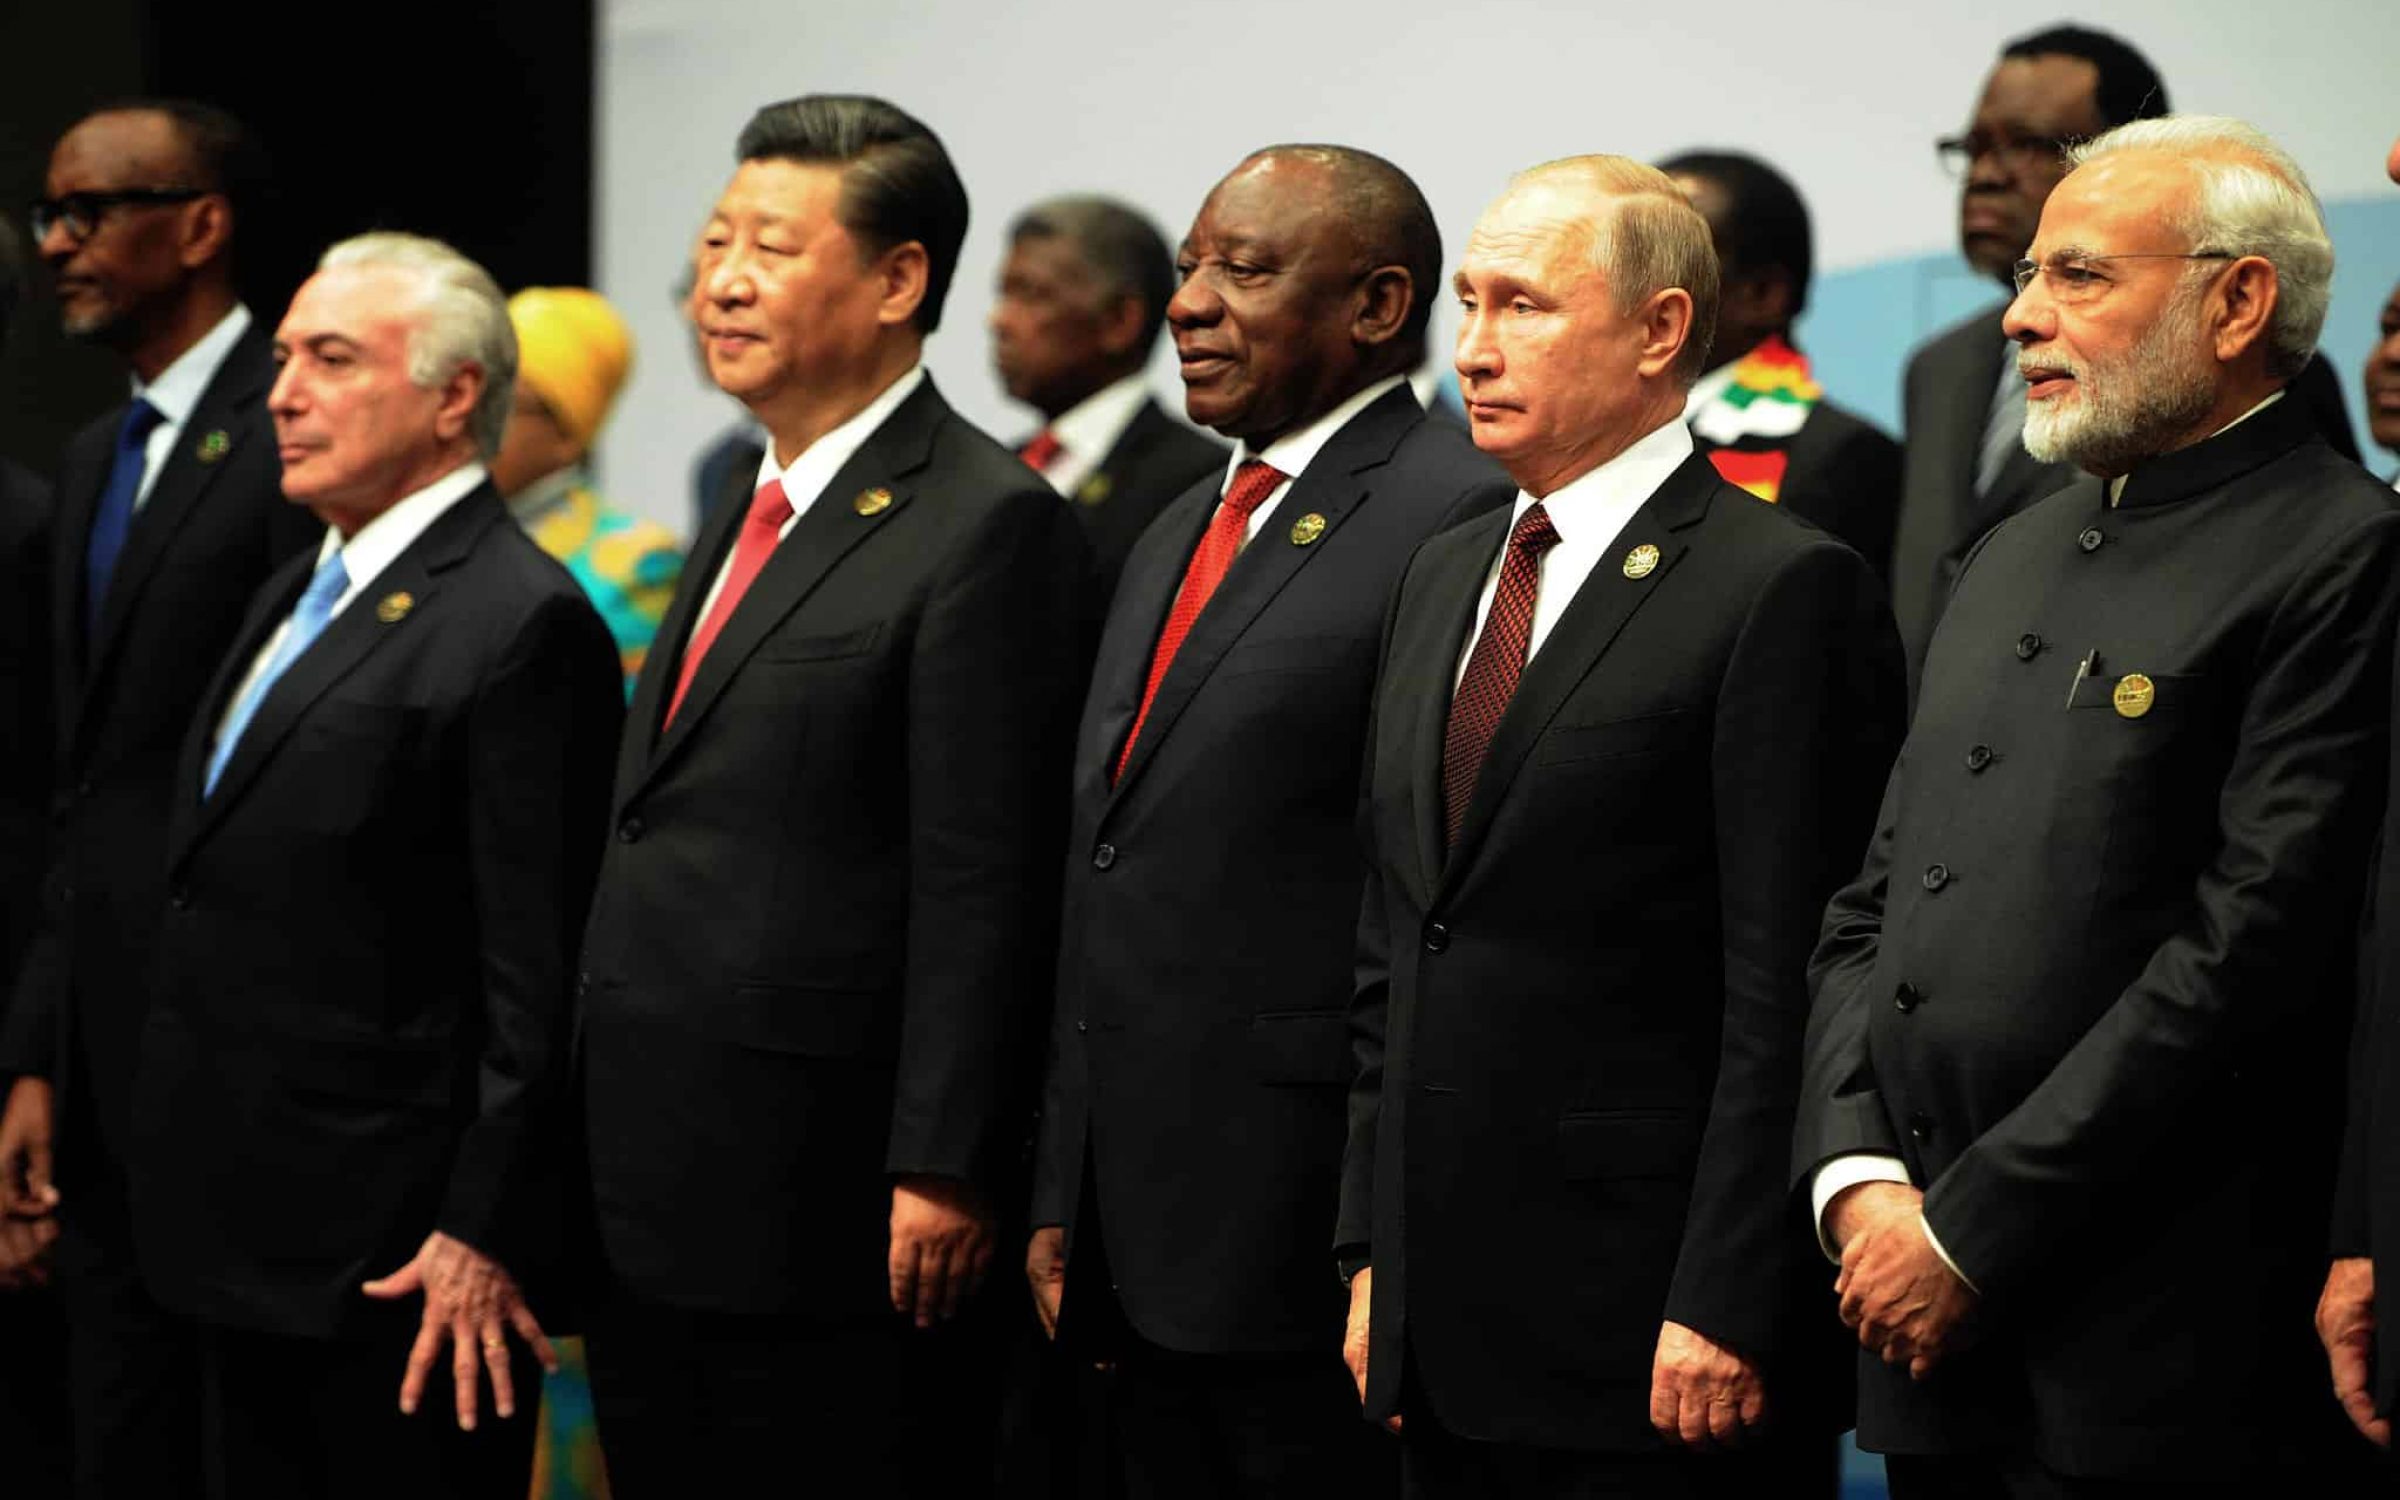 Heads of state at a BRICS Summit in Johannesburg, South Africa ( via GovernmentZA Flickr)